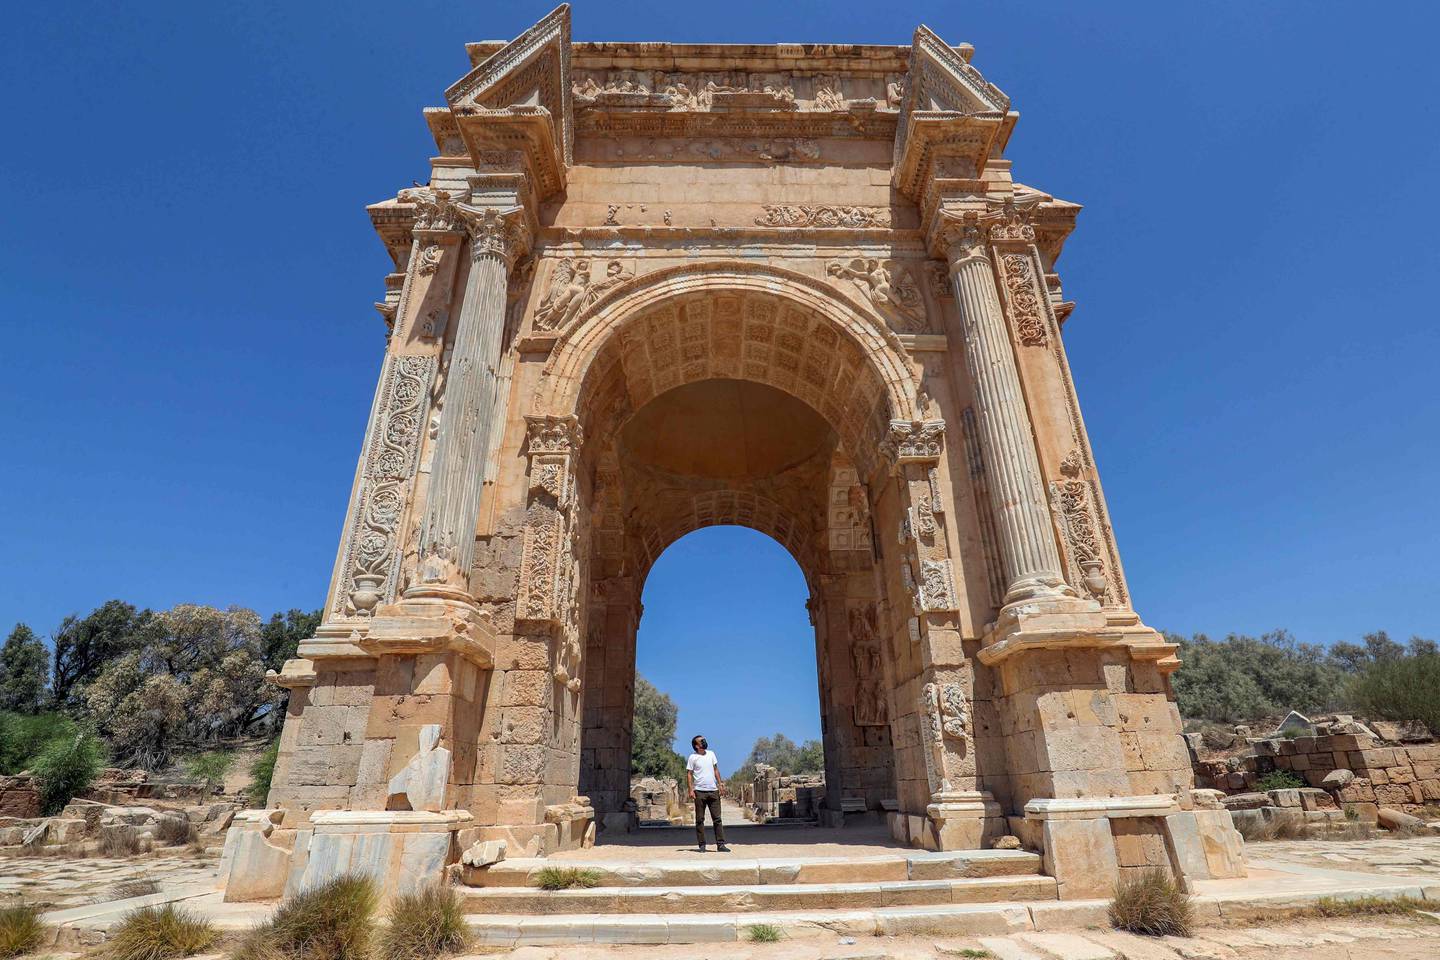 The Arch of Sptimus Severus in the ancient Roman city of Leptis Magna near the coastal Libyan city of Al Khums. AFP